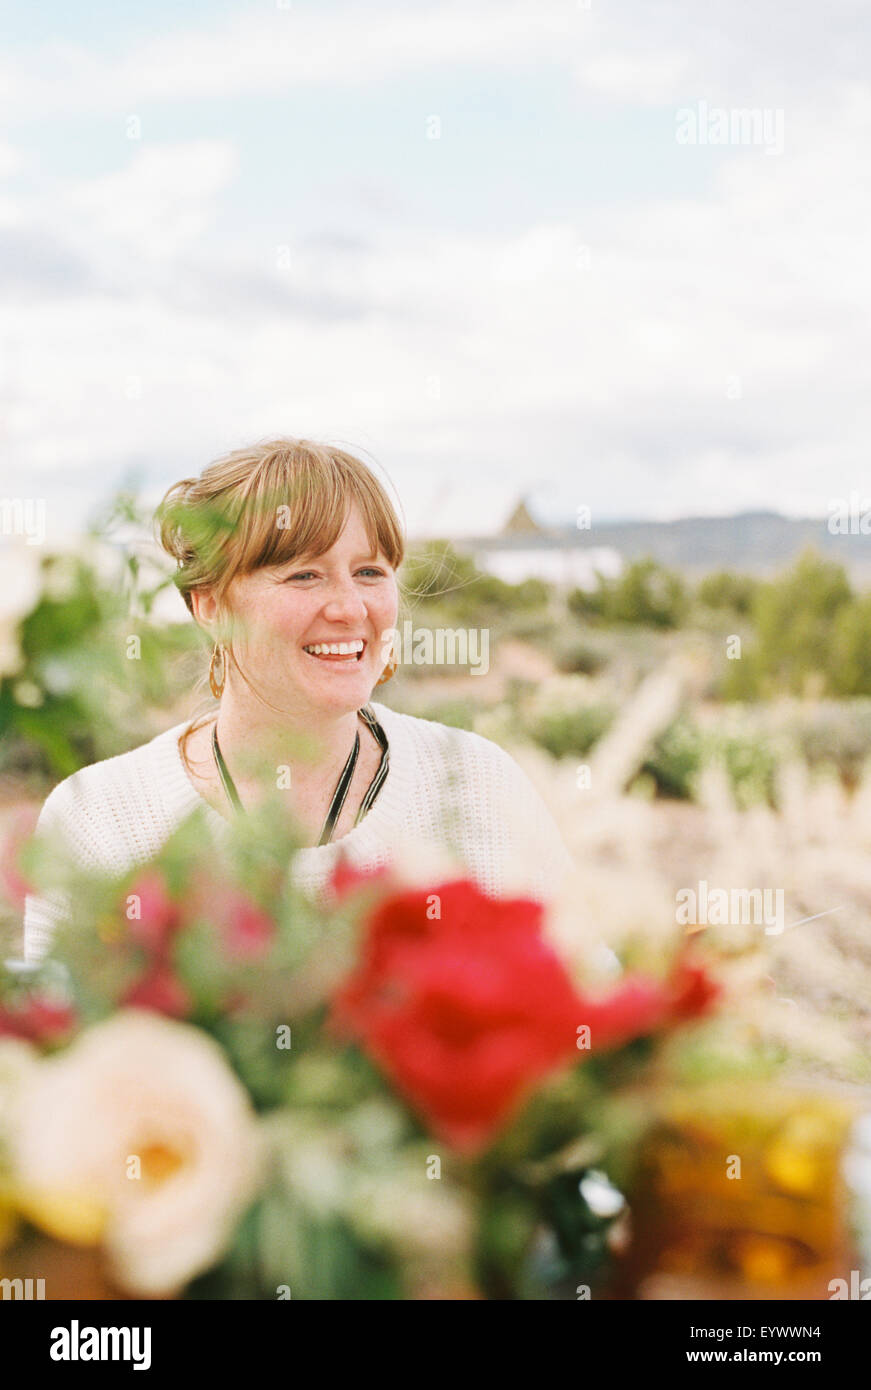 Smiling woman enjoying an outdoor meal in a desert. Stock Photo